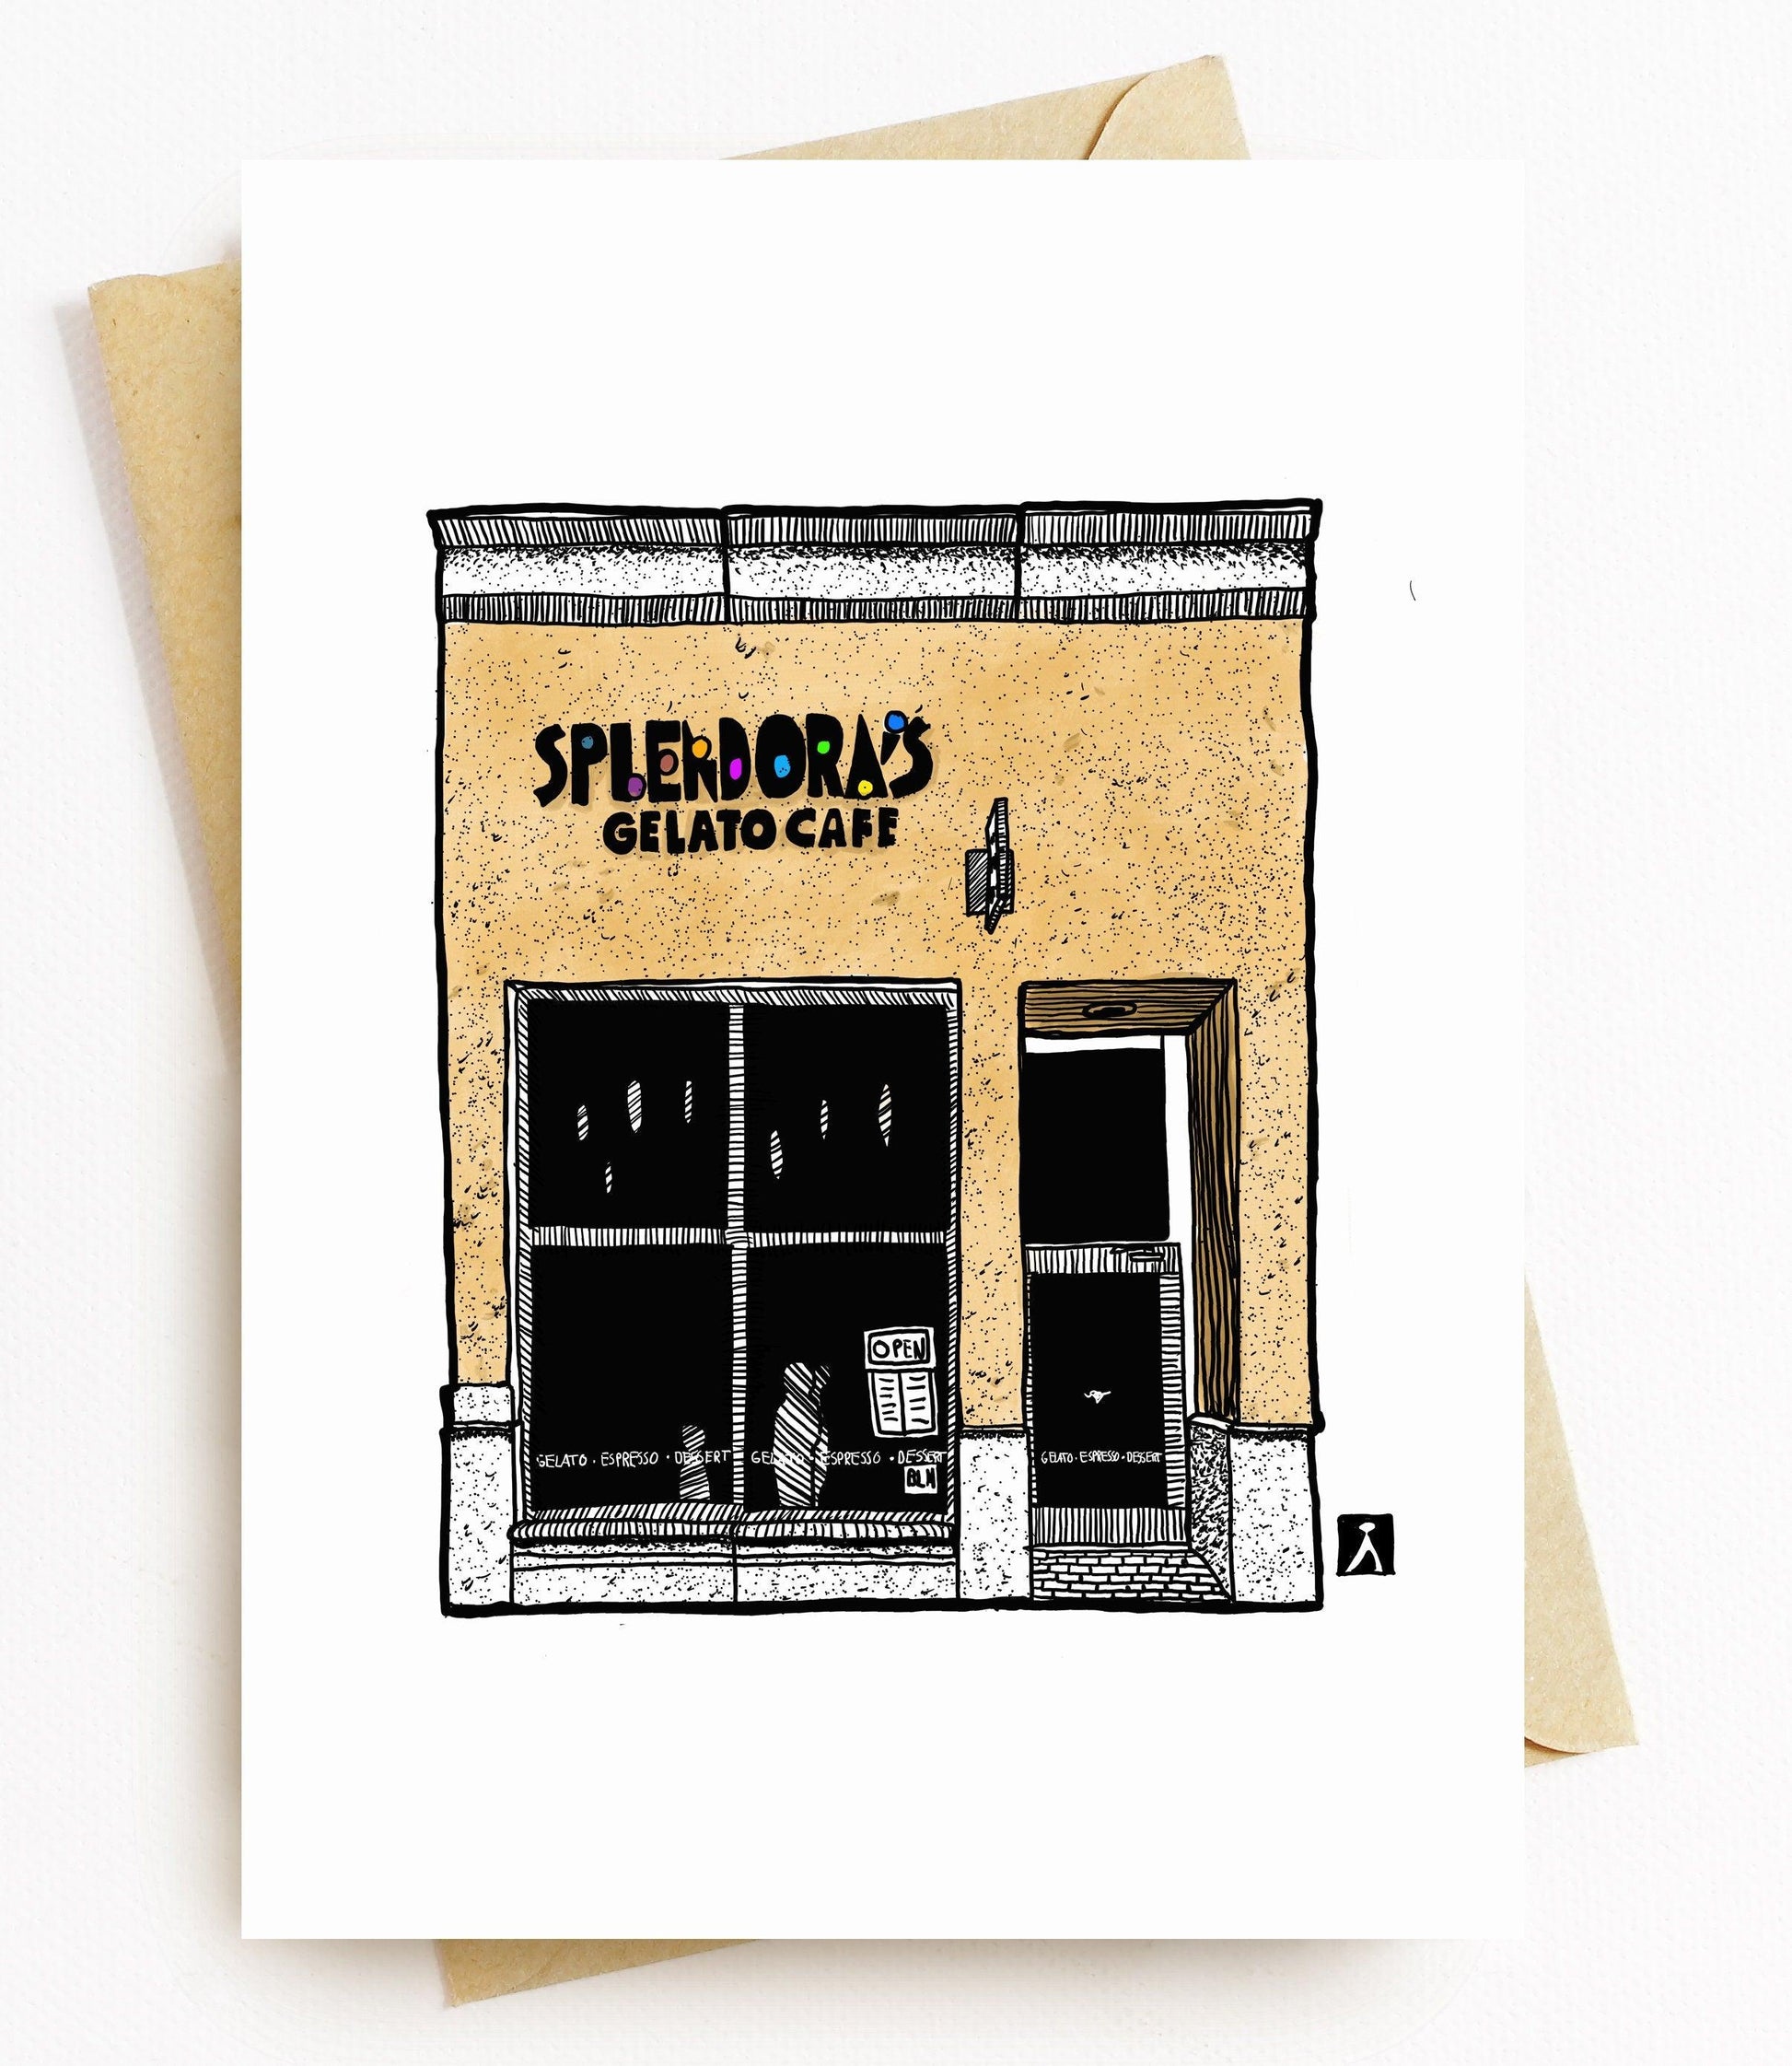 BellavanceInk: Greeting Card With A Pen & Ink Drawing Of Splendora's Gelato Cafe In Charlottesville  5 x 7 Inches - BellavanceInk